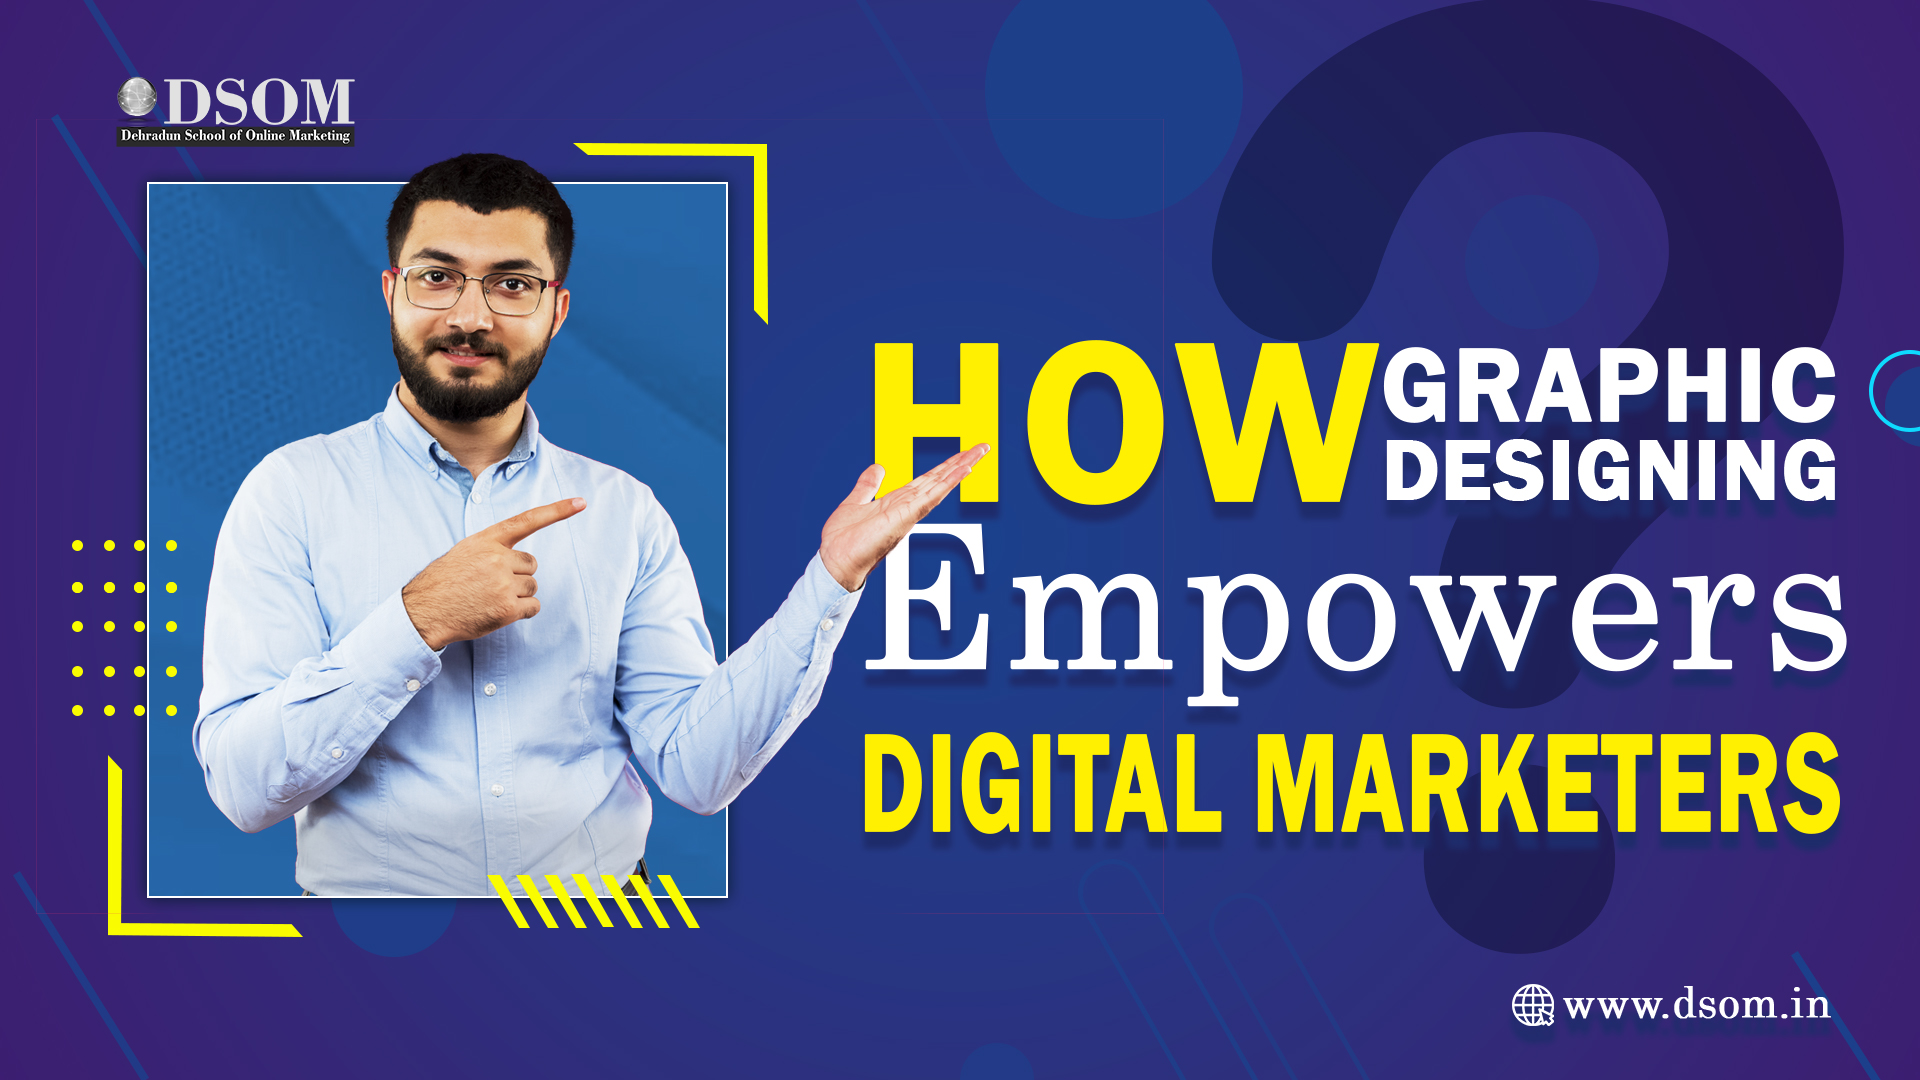 The Symbiotic Relationship: How Graphic Designing Empowers Digital Marketers